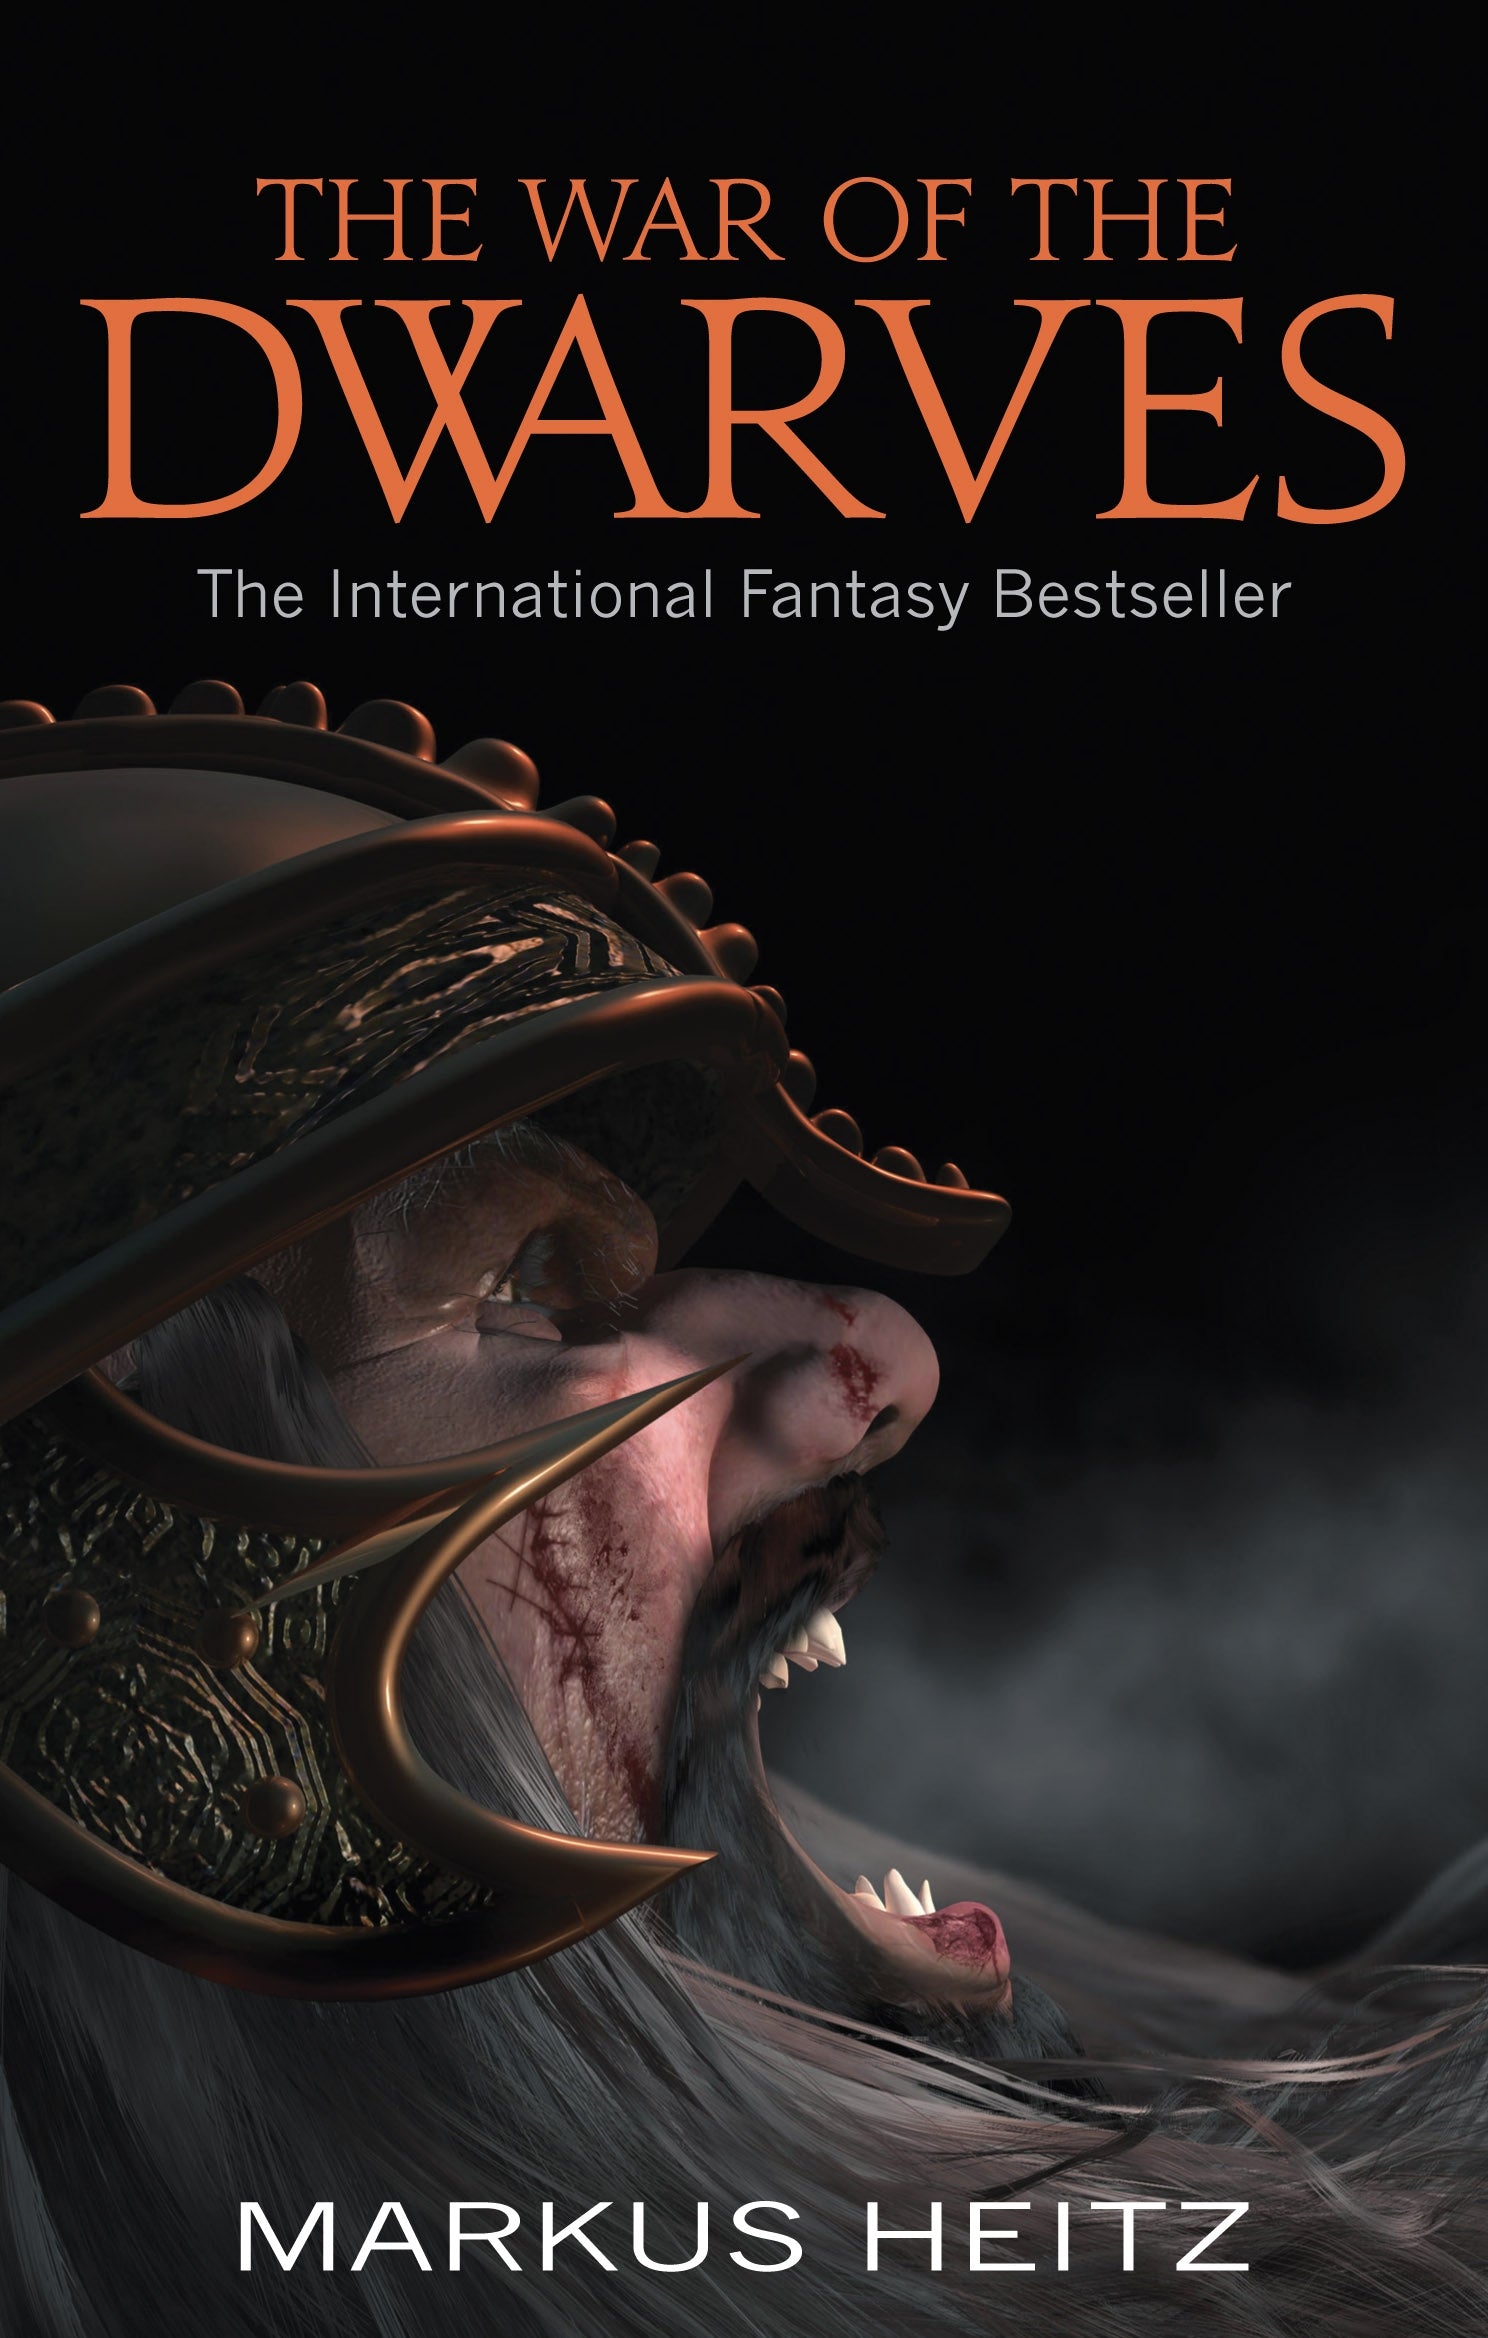 The War Of The Dwarves by Markus Heitz